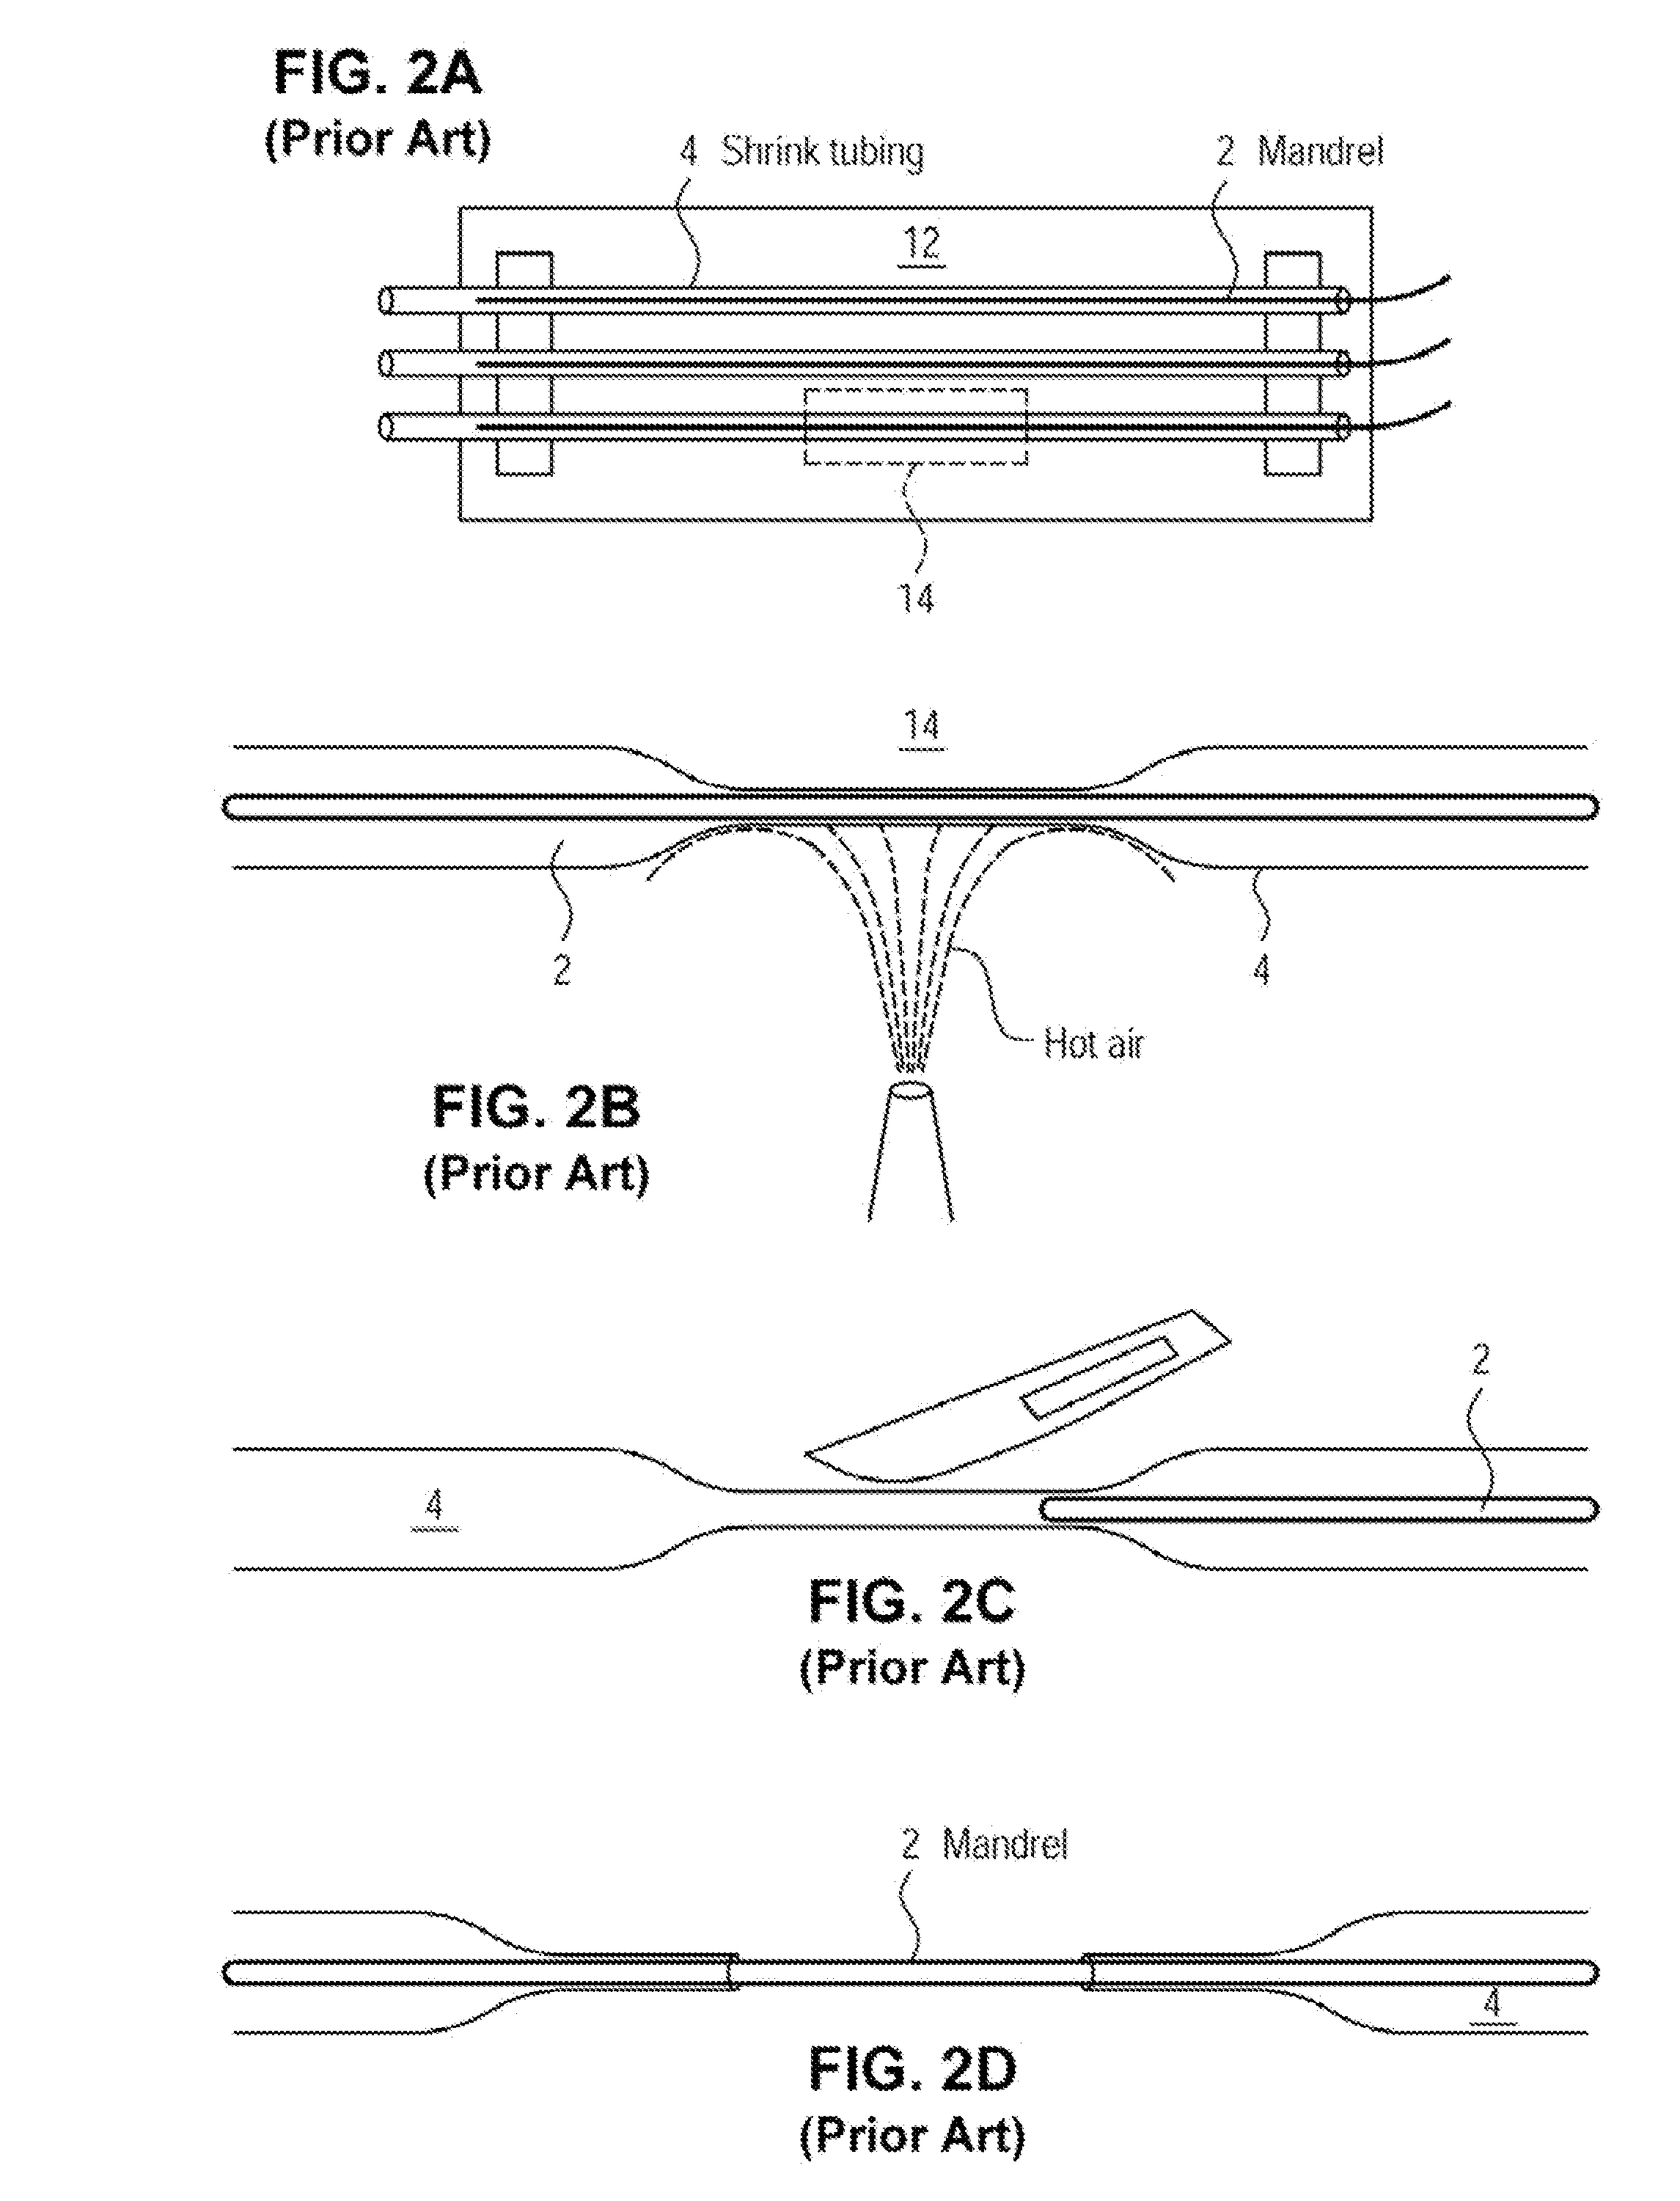 Method for creating perfusable microvessel systems